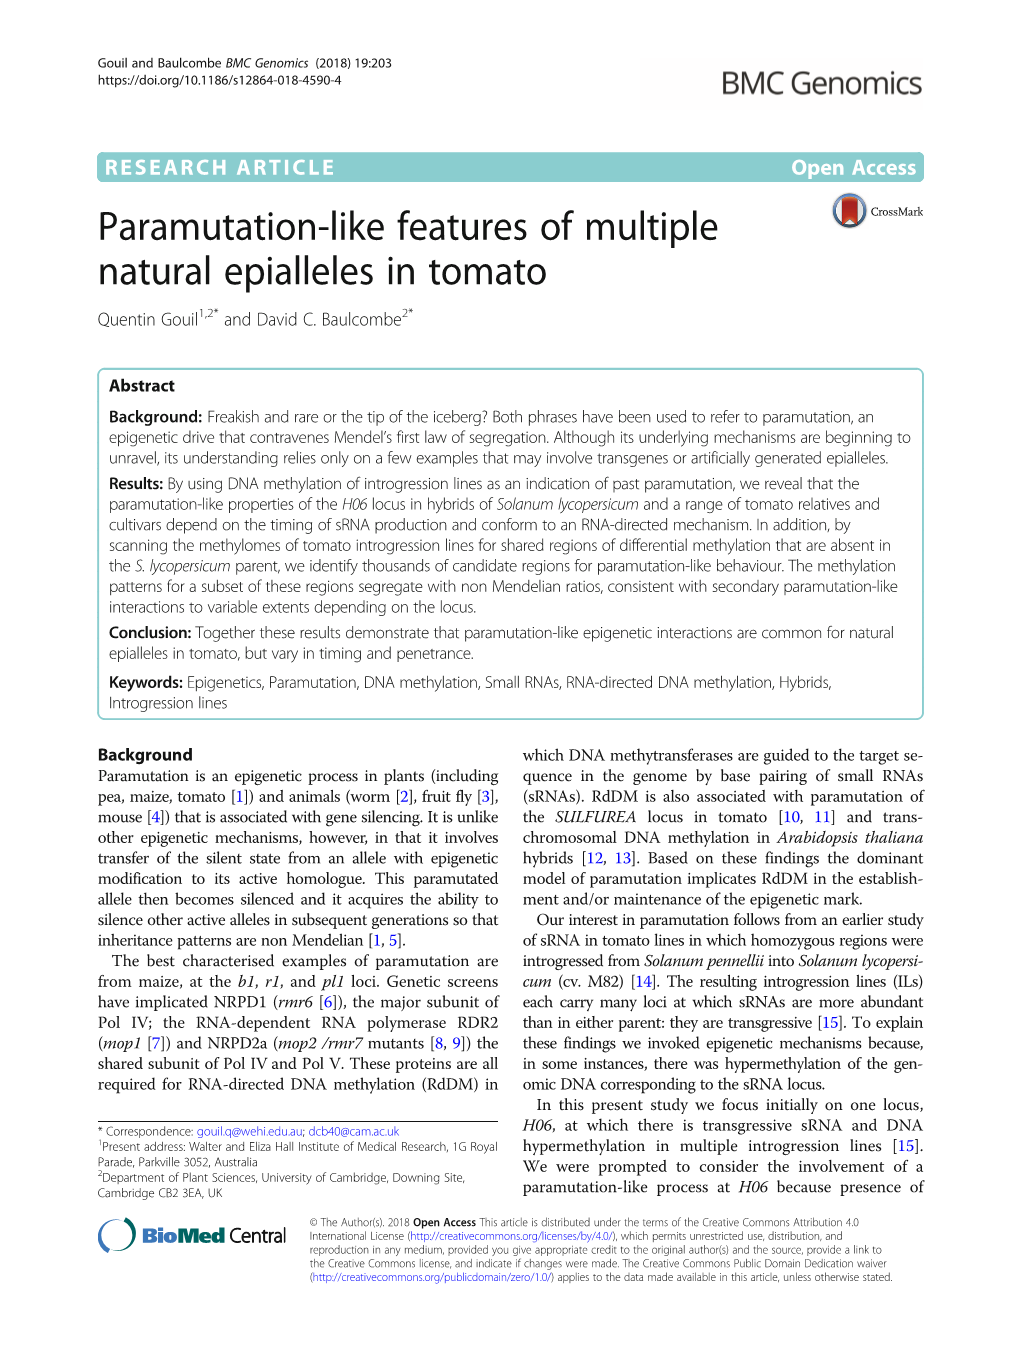 Paramutation-Like Features of Multiple Natural Epialleles in Tomato Quentin Gouil1,2* and David C